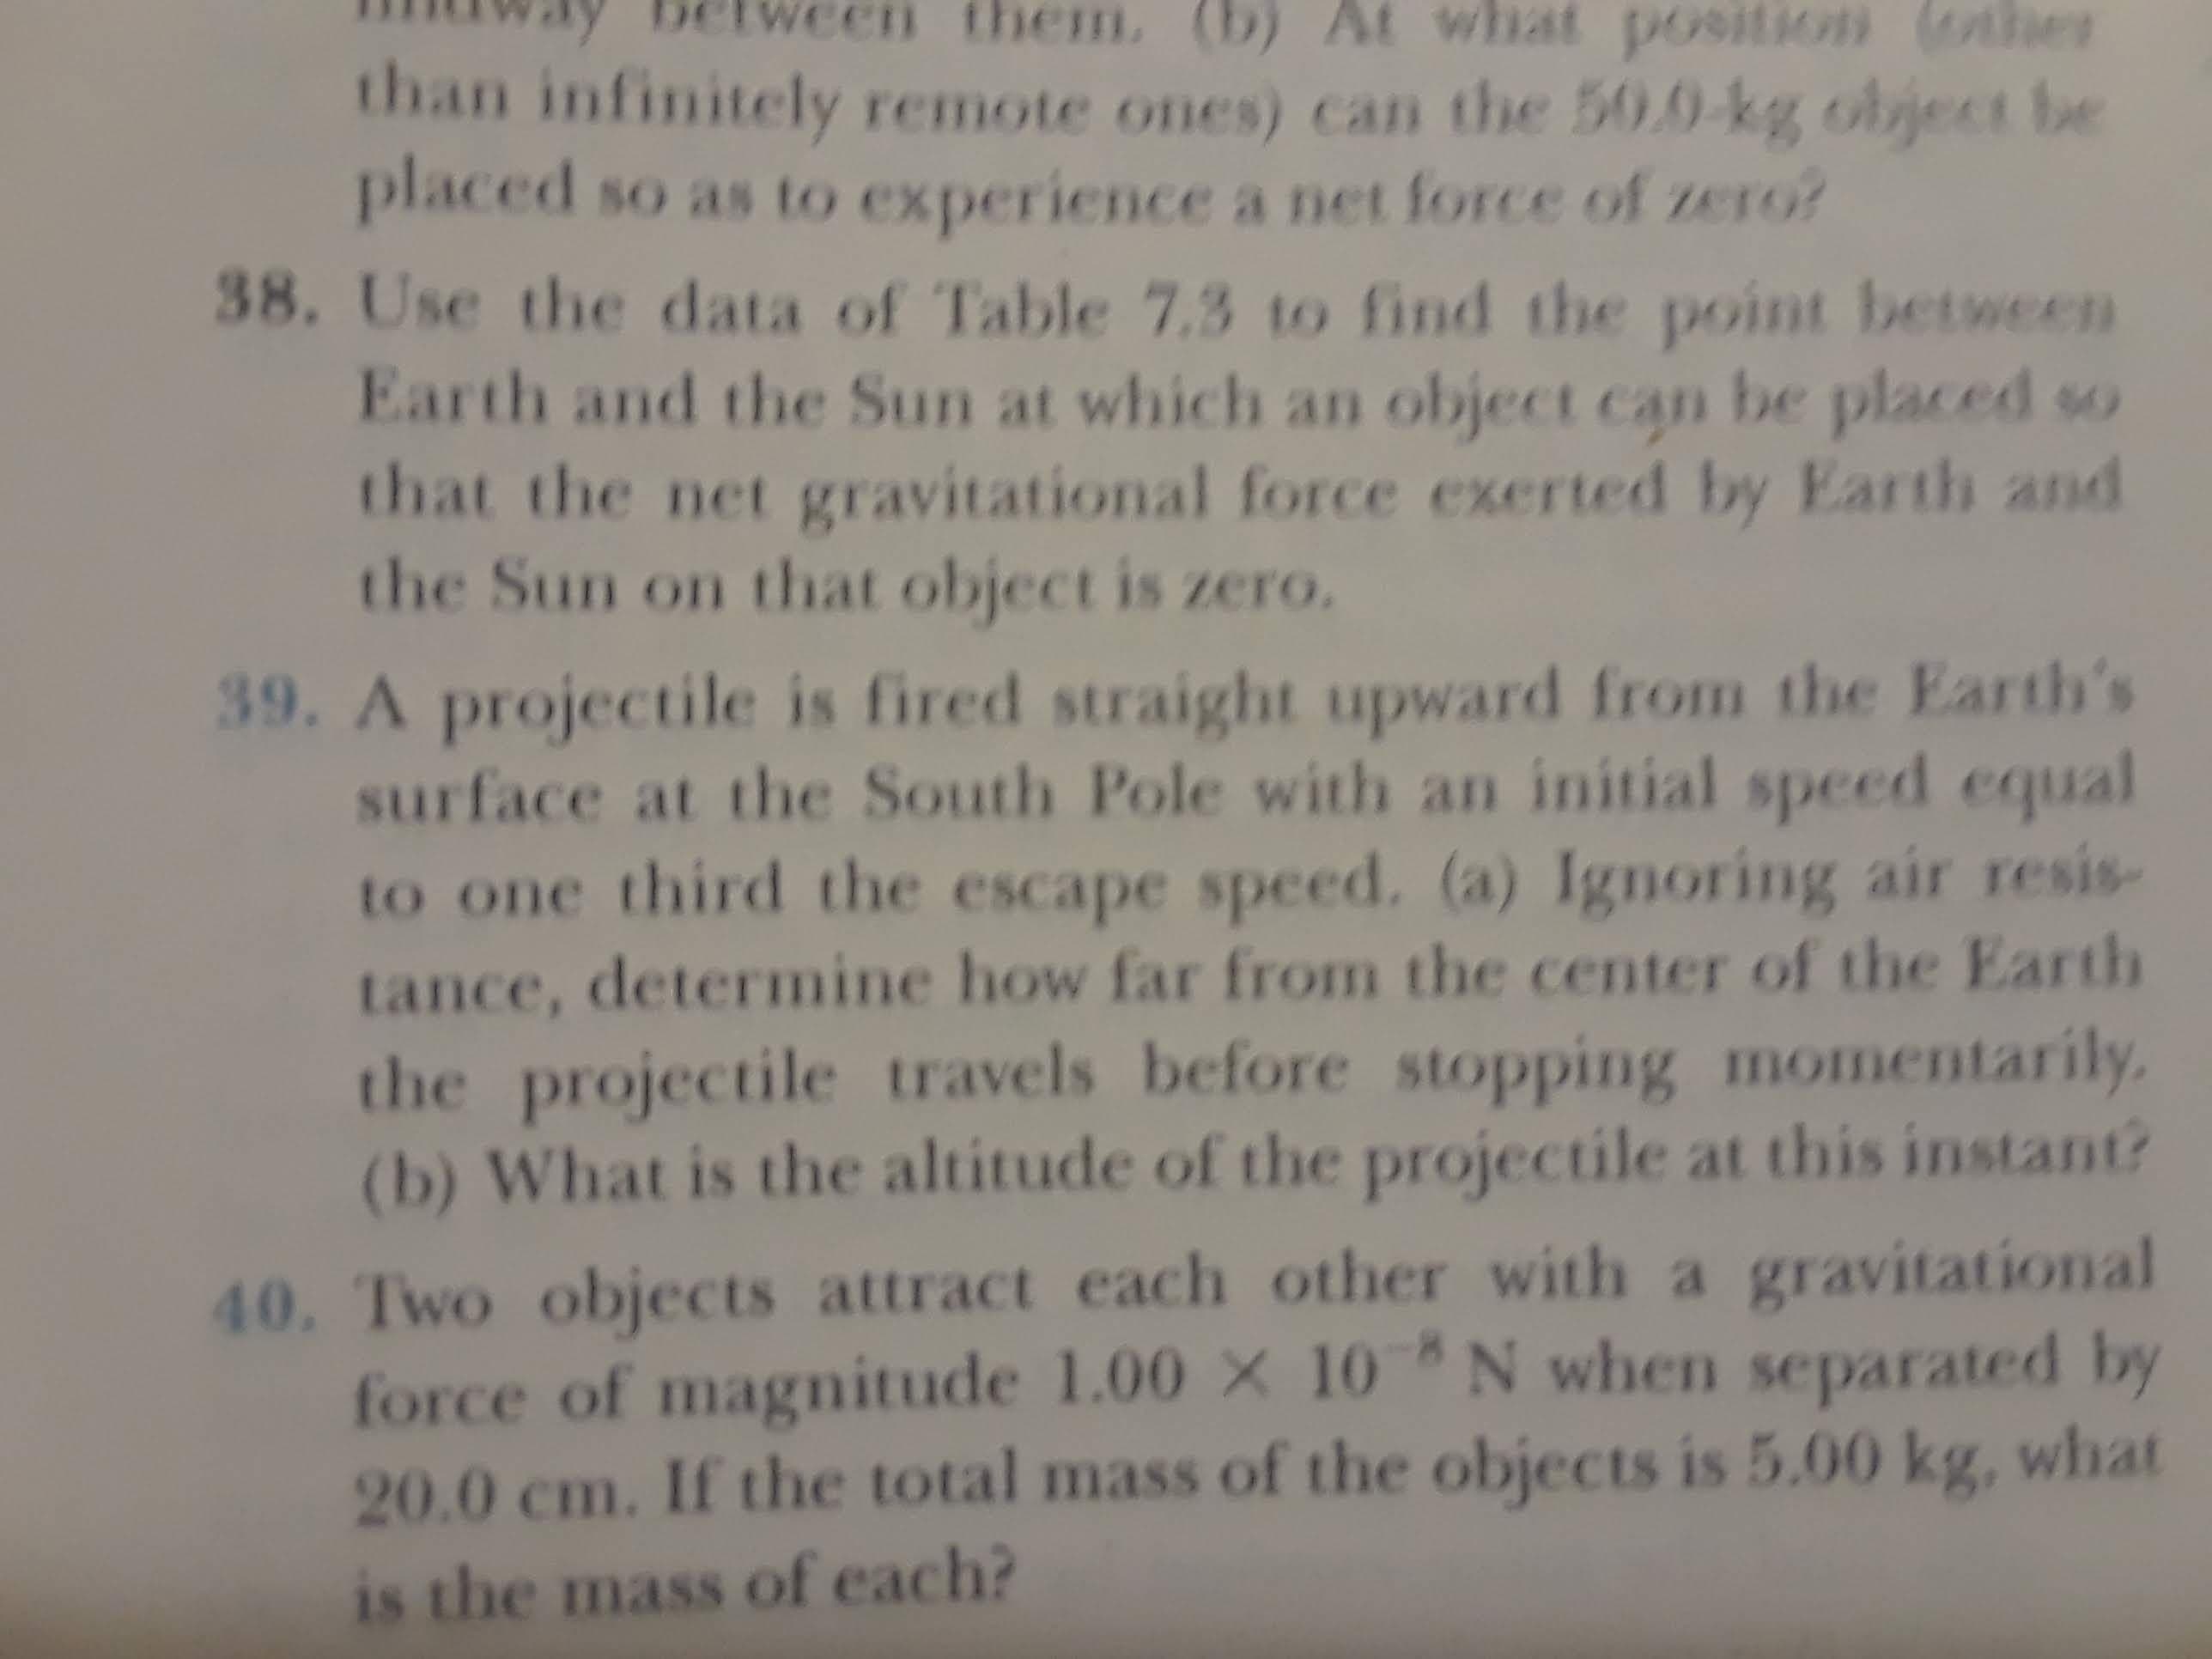 them. (b) At what po9ition (othhe
than infinitely remote ones) can the 50.0-kg object be
placed so as to experience a net force of zero?
38. Use the data of Table 7.3 to find the point between
Earth and the Sun at which an object can be placed so
that the net gravitational force exerted by Earth and
the Sun on that object is zero.
39. A projectile is fired straight upward from the Earth's
surface at the South Pole with an initial speed equal
to one third the escape speed. (a) Ignoring air resis-
tance, determine how far from the center of the Earth
the projectile travels before stopping momentarily
(b) What is the altitude of the projectile at this instant?
40. Two objects attract each other with a gravitational
force of magnitude 1.00 X 10 N when separated by
20.0 cm. If the total mass of the objects is 5.00 kg, what
is the mass of each?
